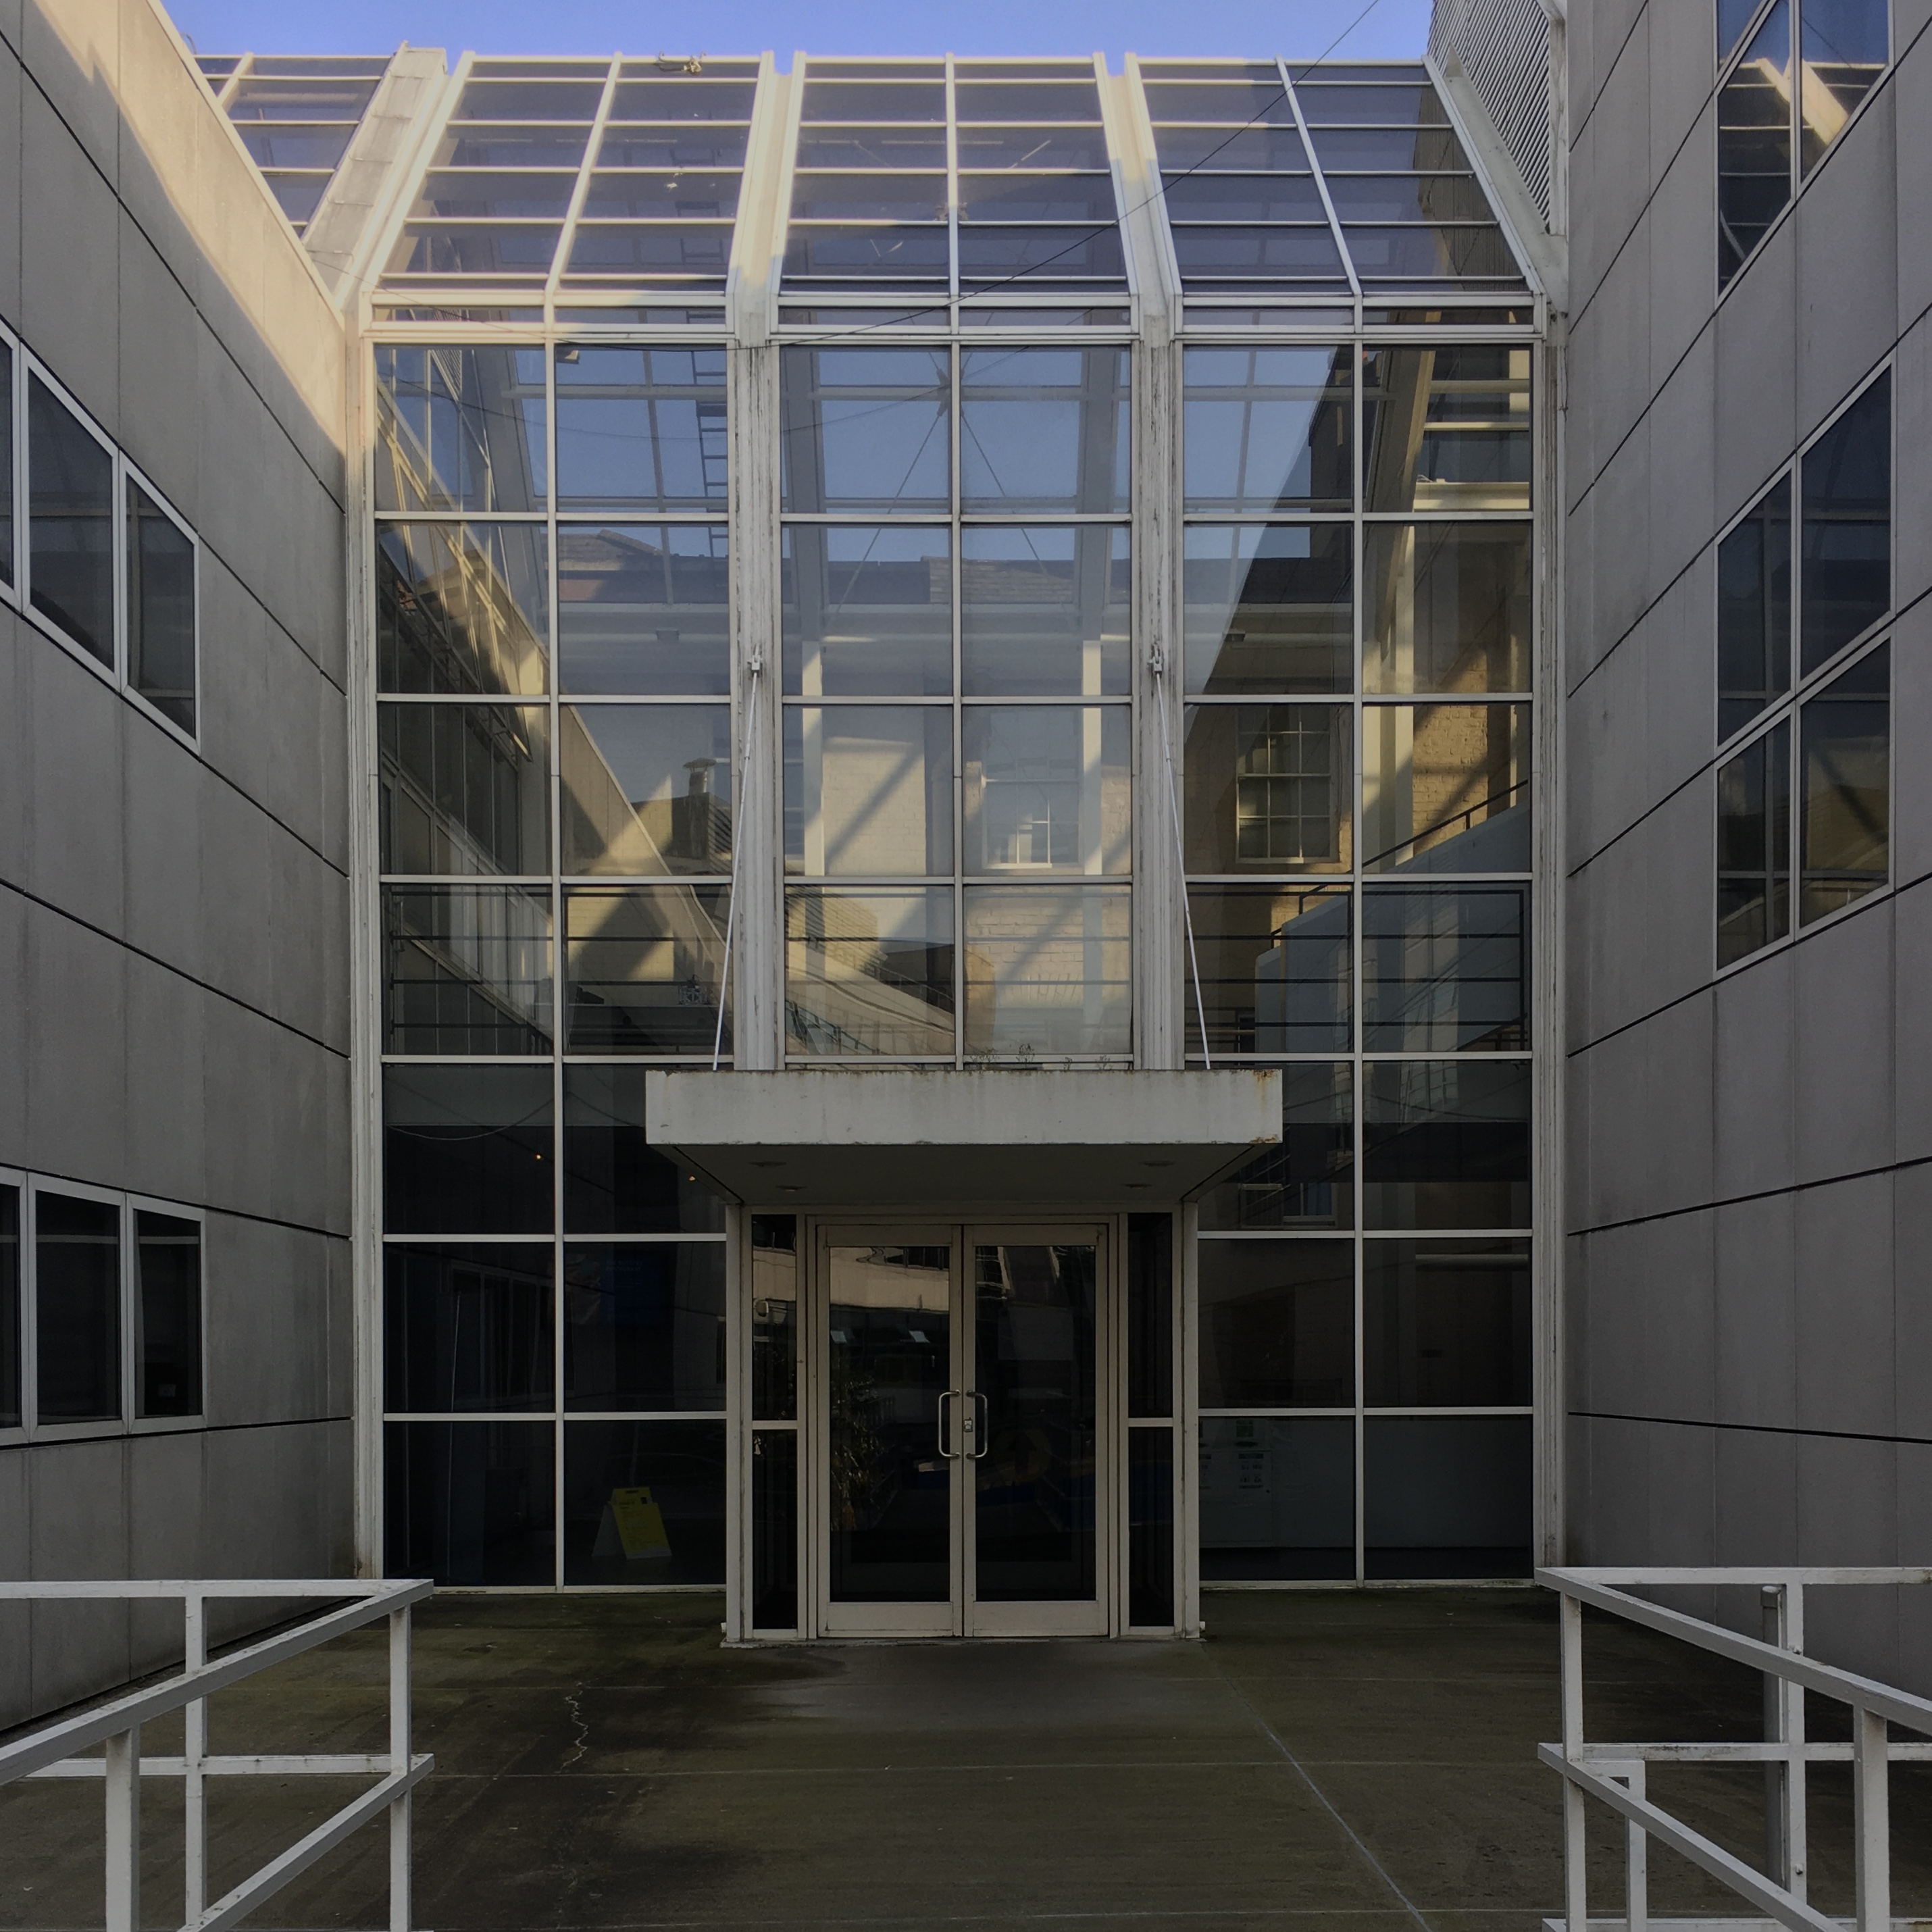 Hamilton building: The glass atrium forms an indoor street connecting to the townhouses on the outside of campus.